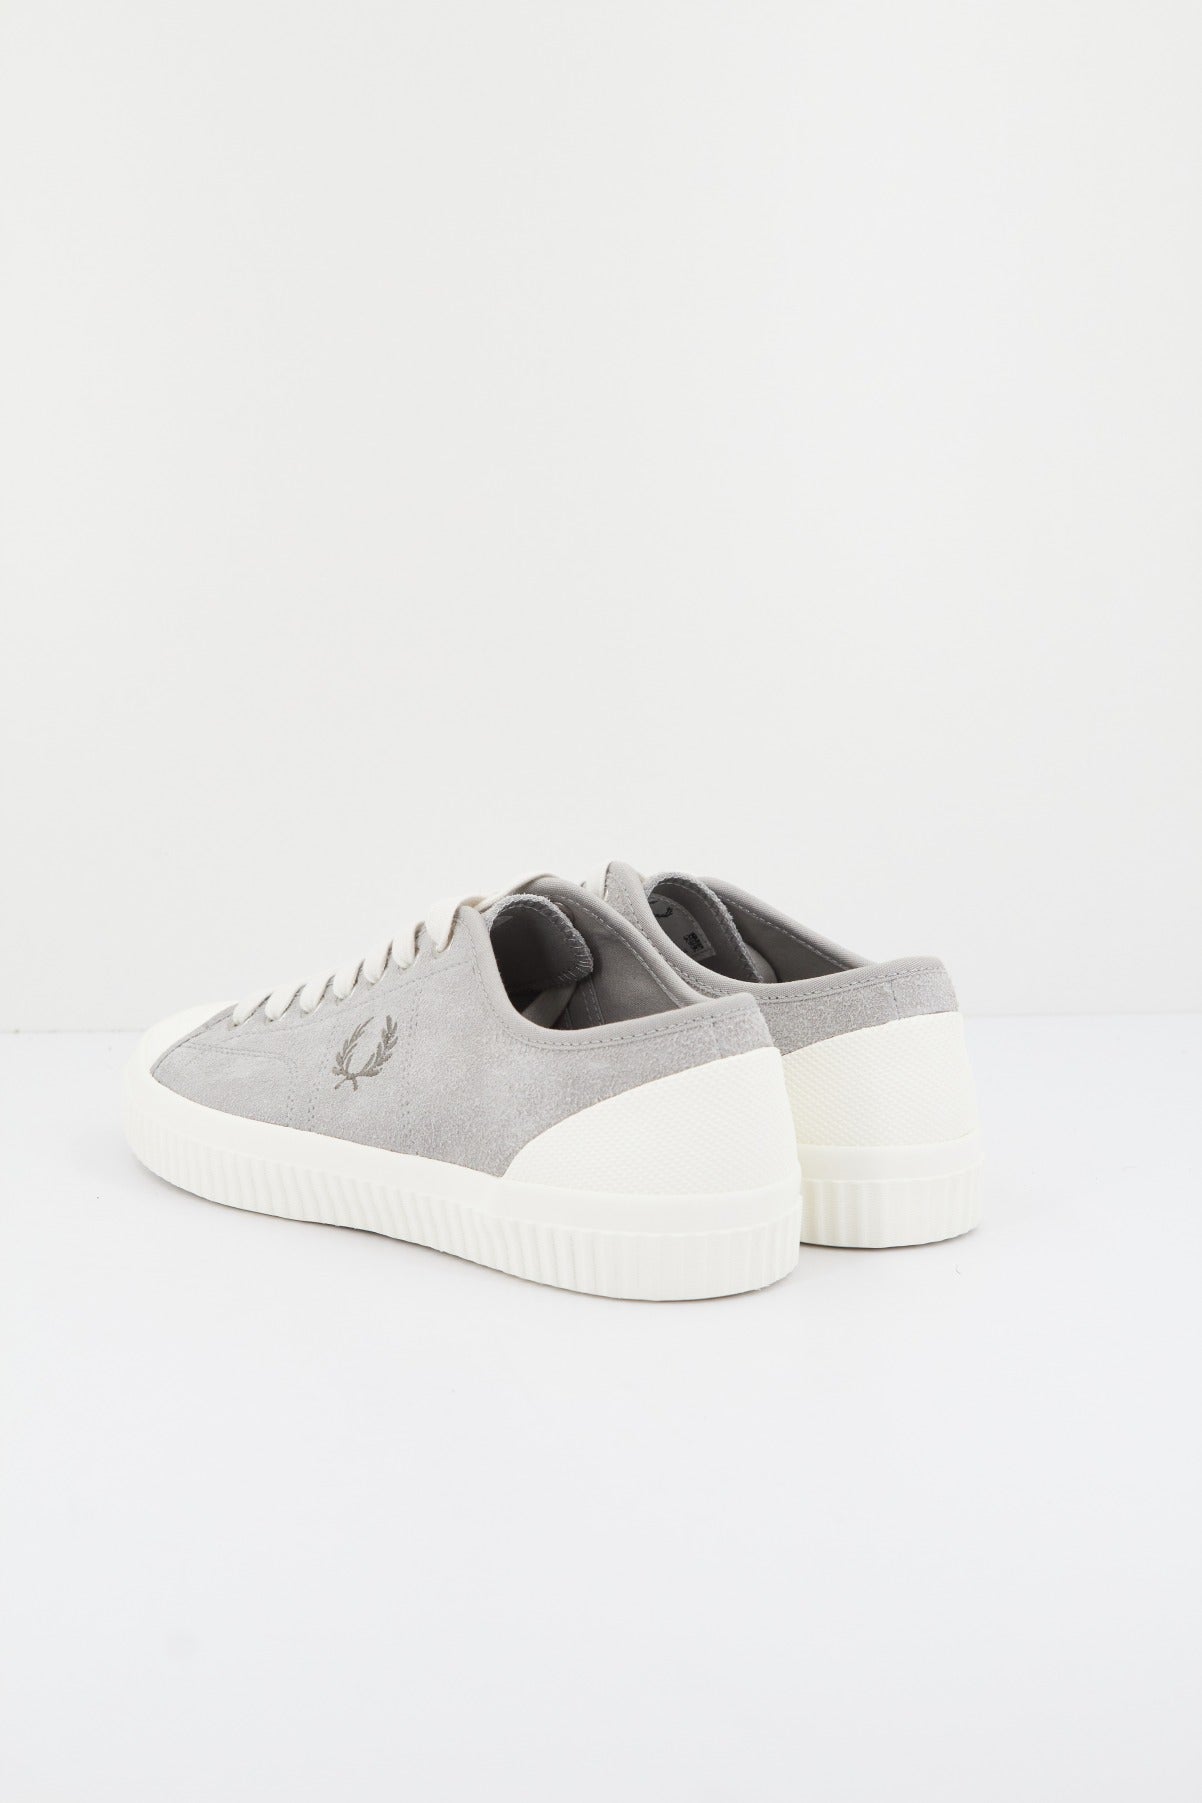 FRED PERRY HUGHES LOW TEXTURED SUEDE en color GRIS  (3)